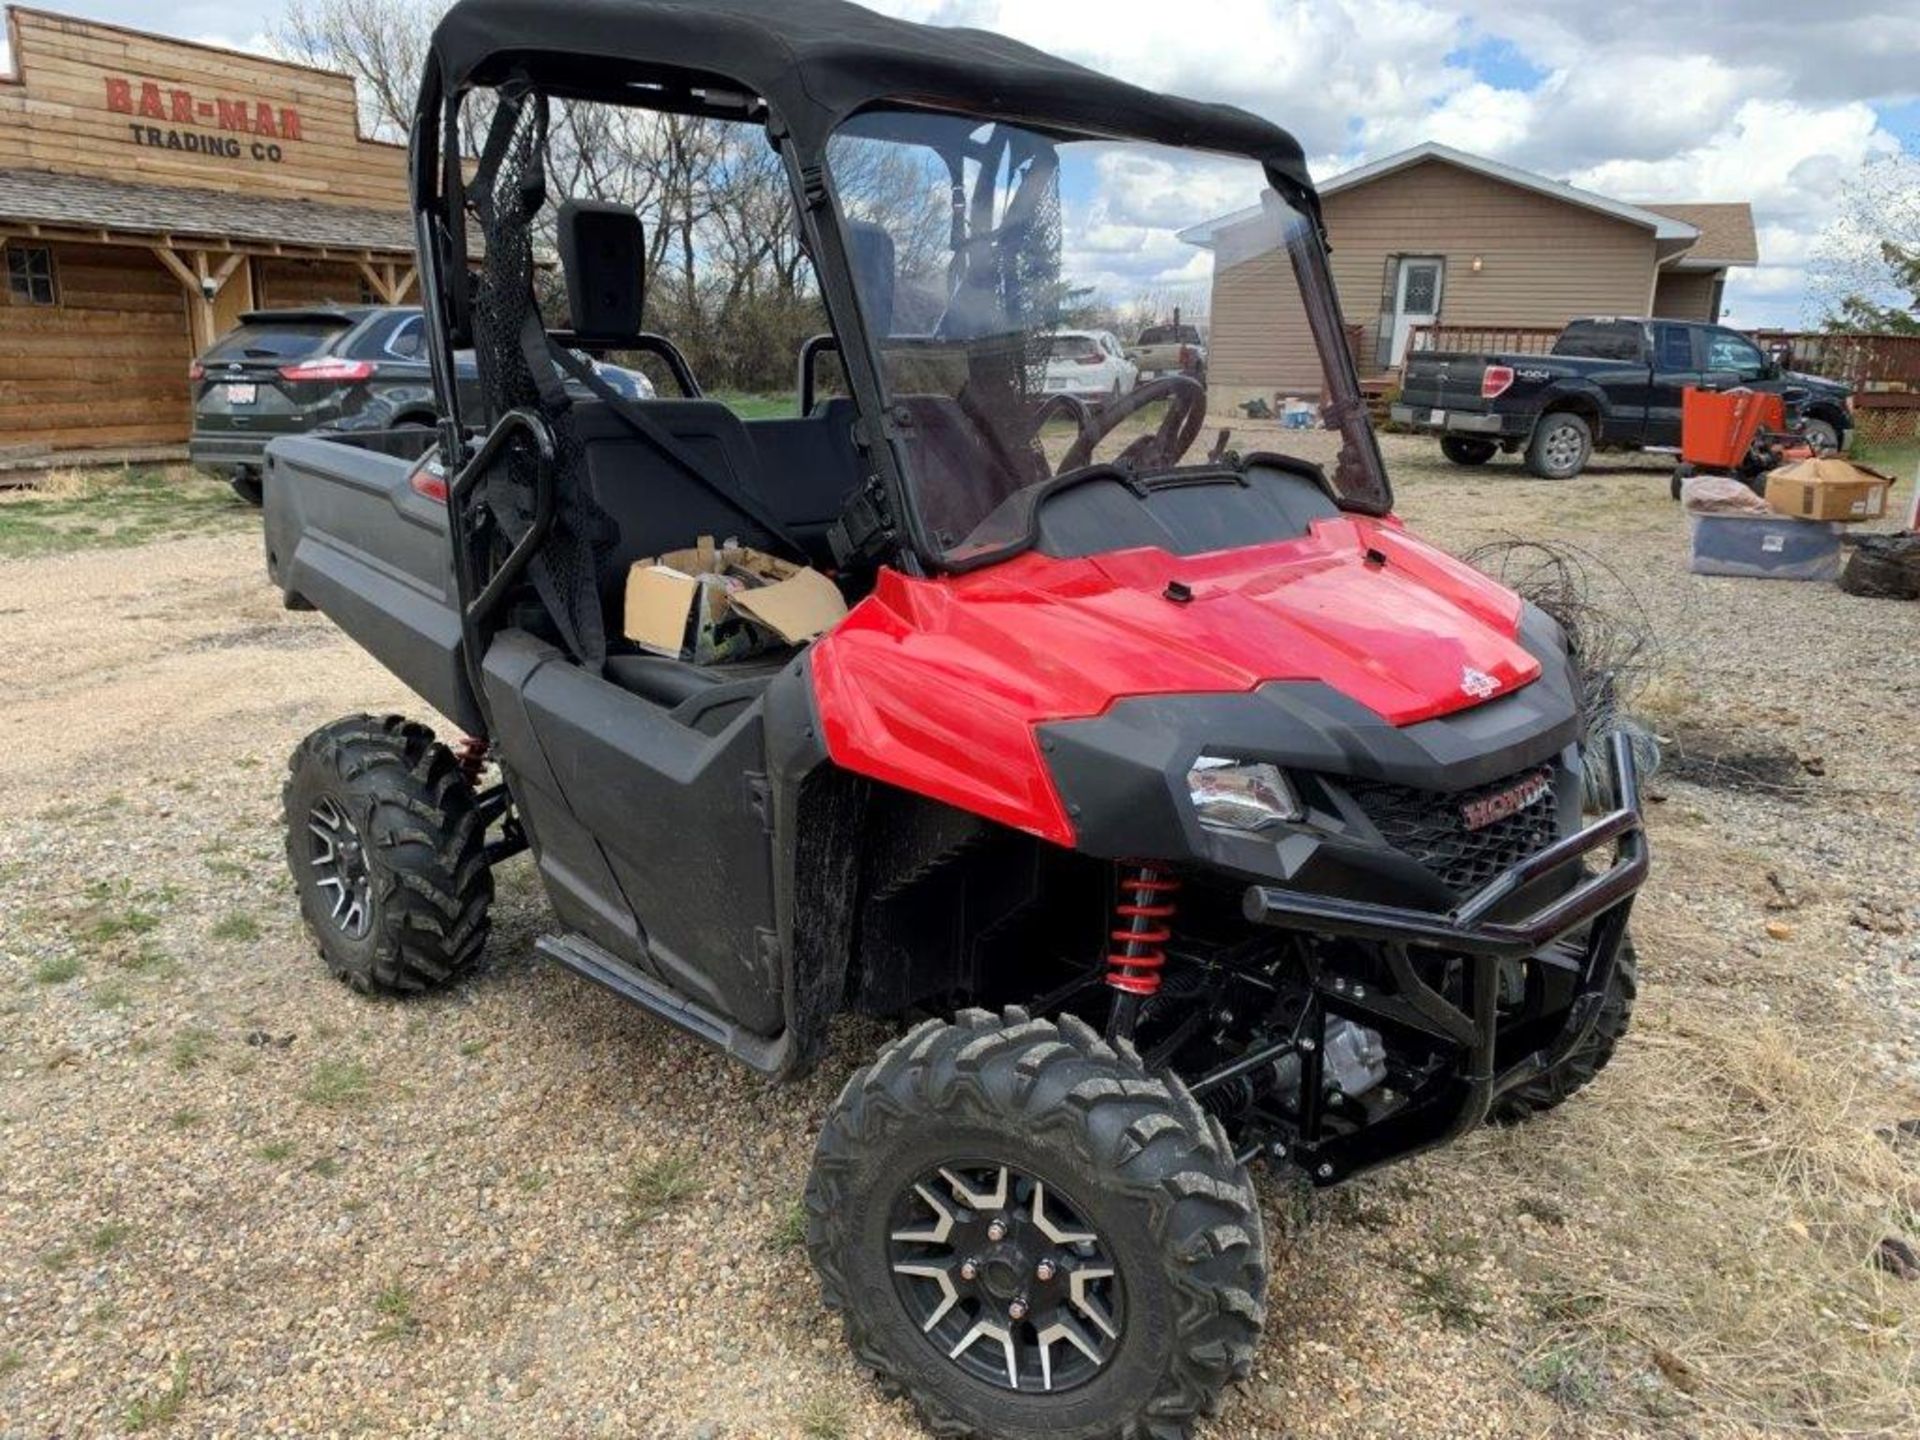 2021 HONDA PIONEER 700 4X4 SIDE-BY-SIDE W/ CARGO BOX, ONLY 97 KM SHOWING - Image 2 of 4